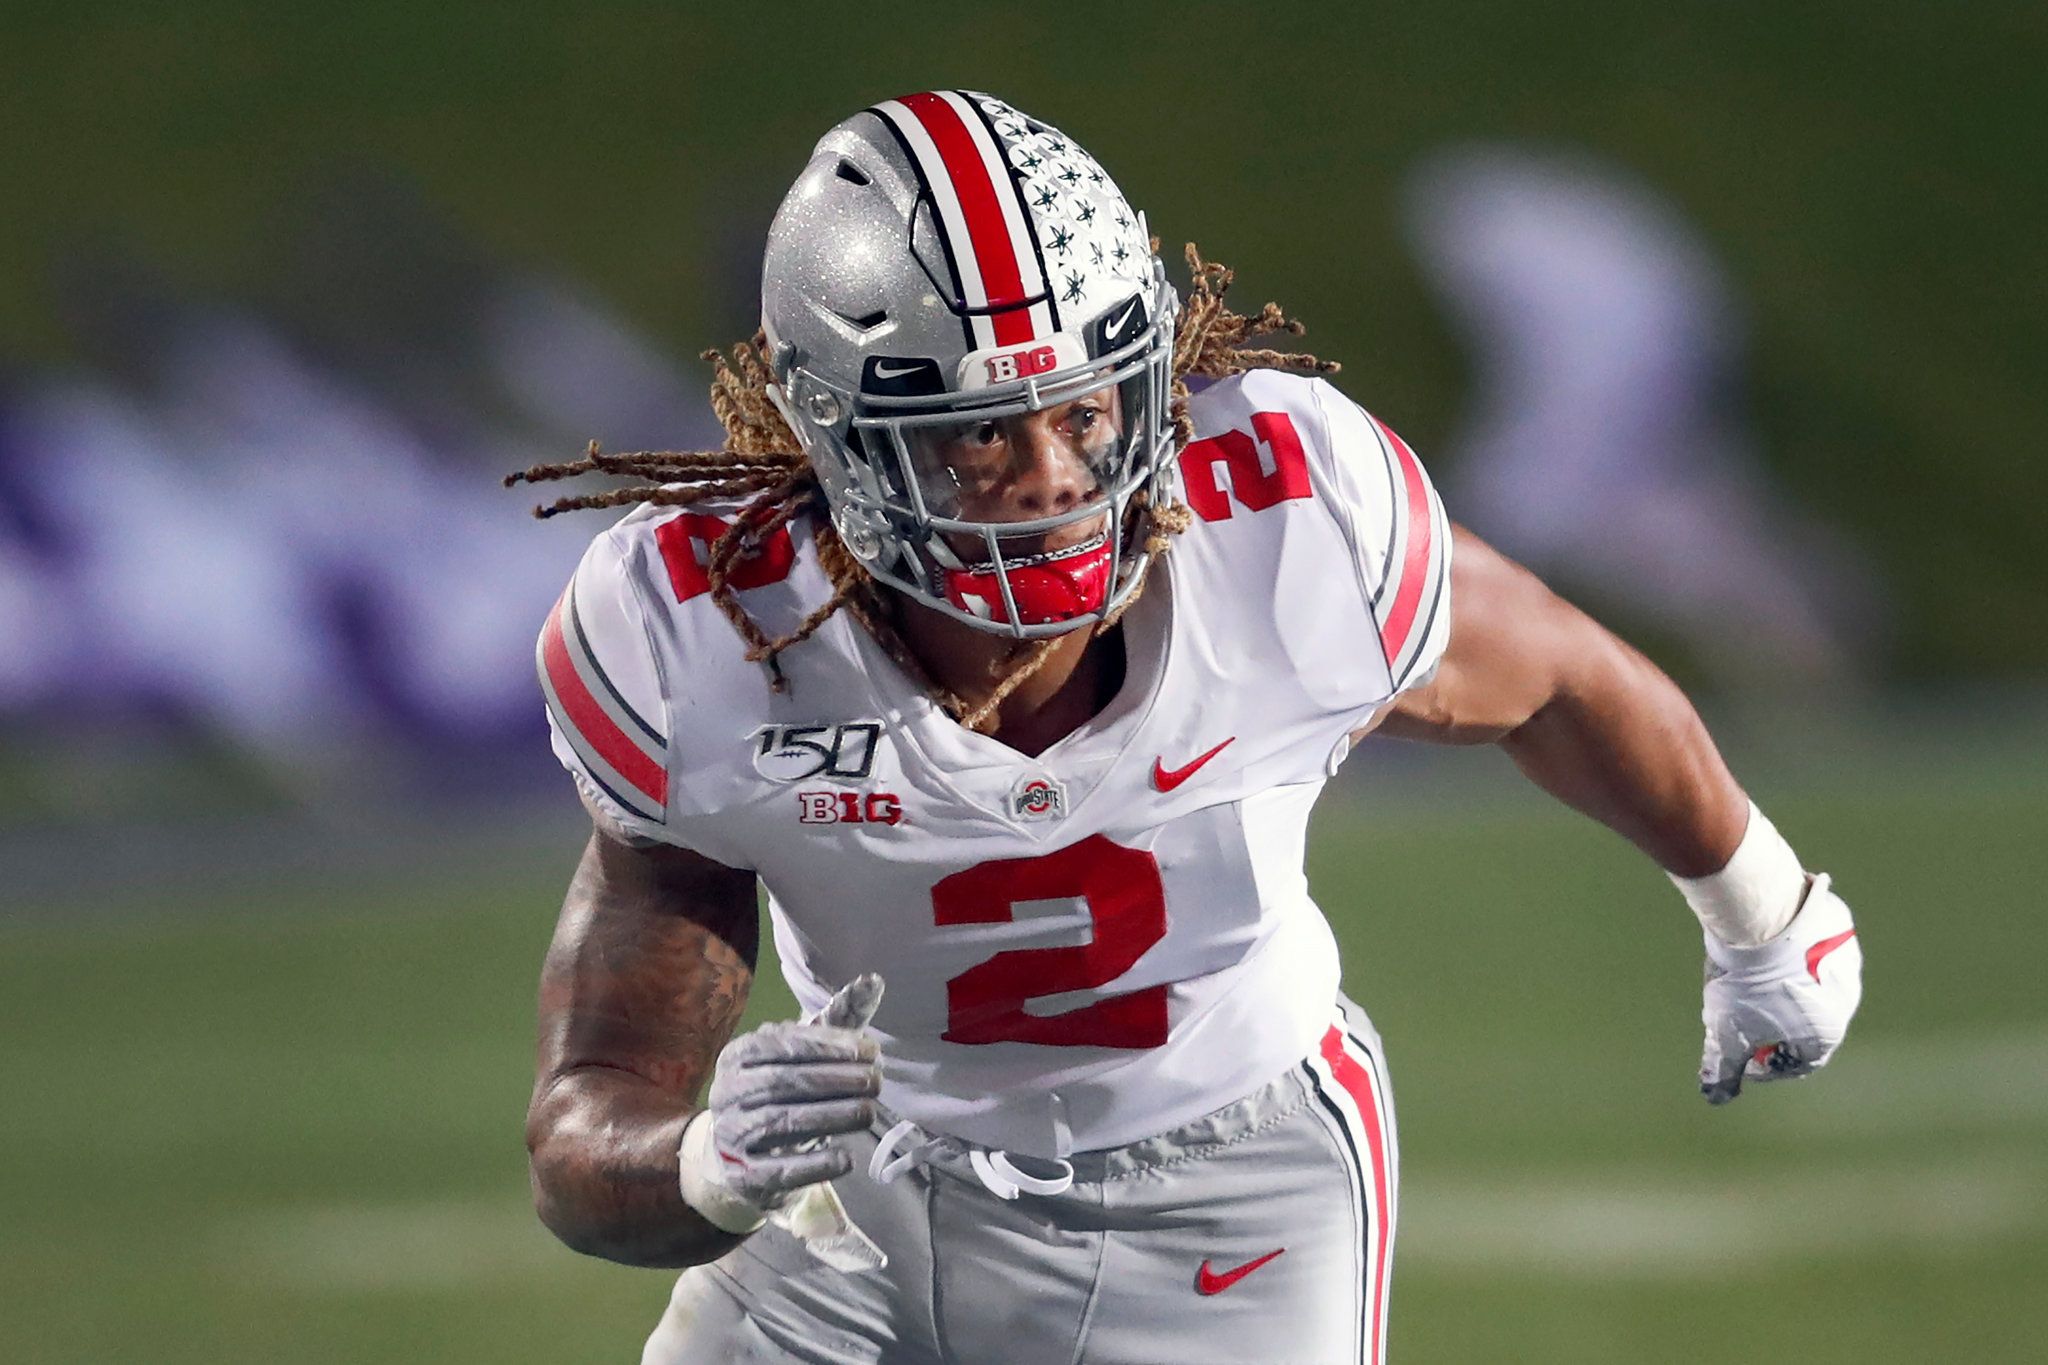 Chase Young of Ohio State Won't Play Over N.C.A.A. 'Issue'